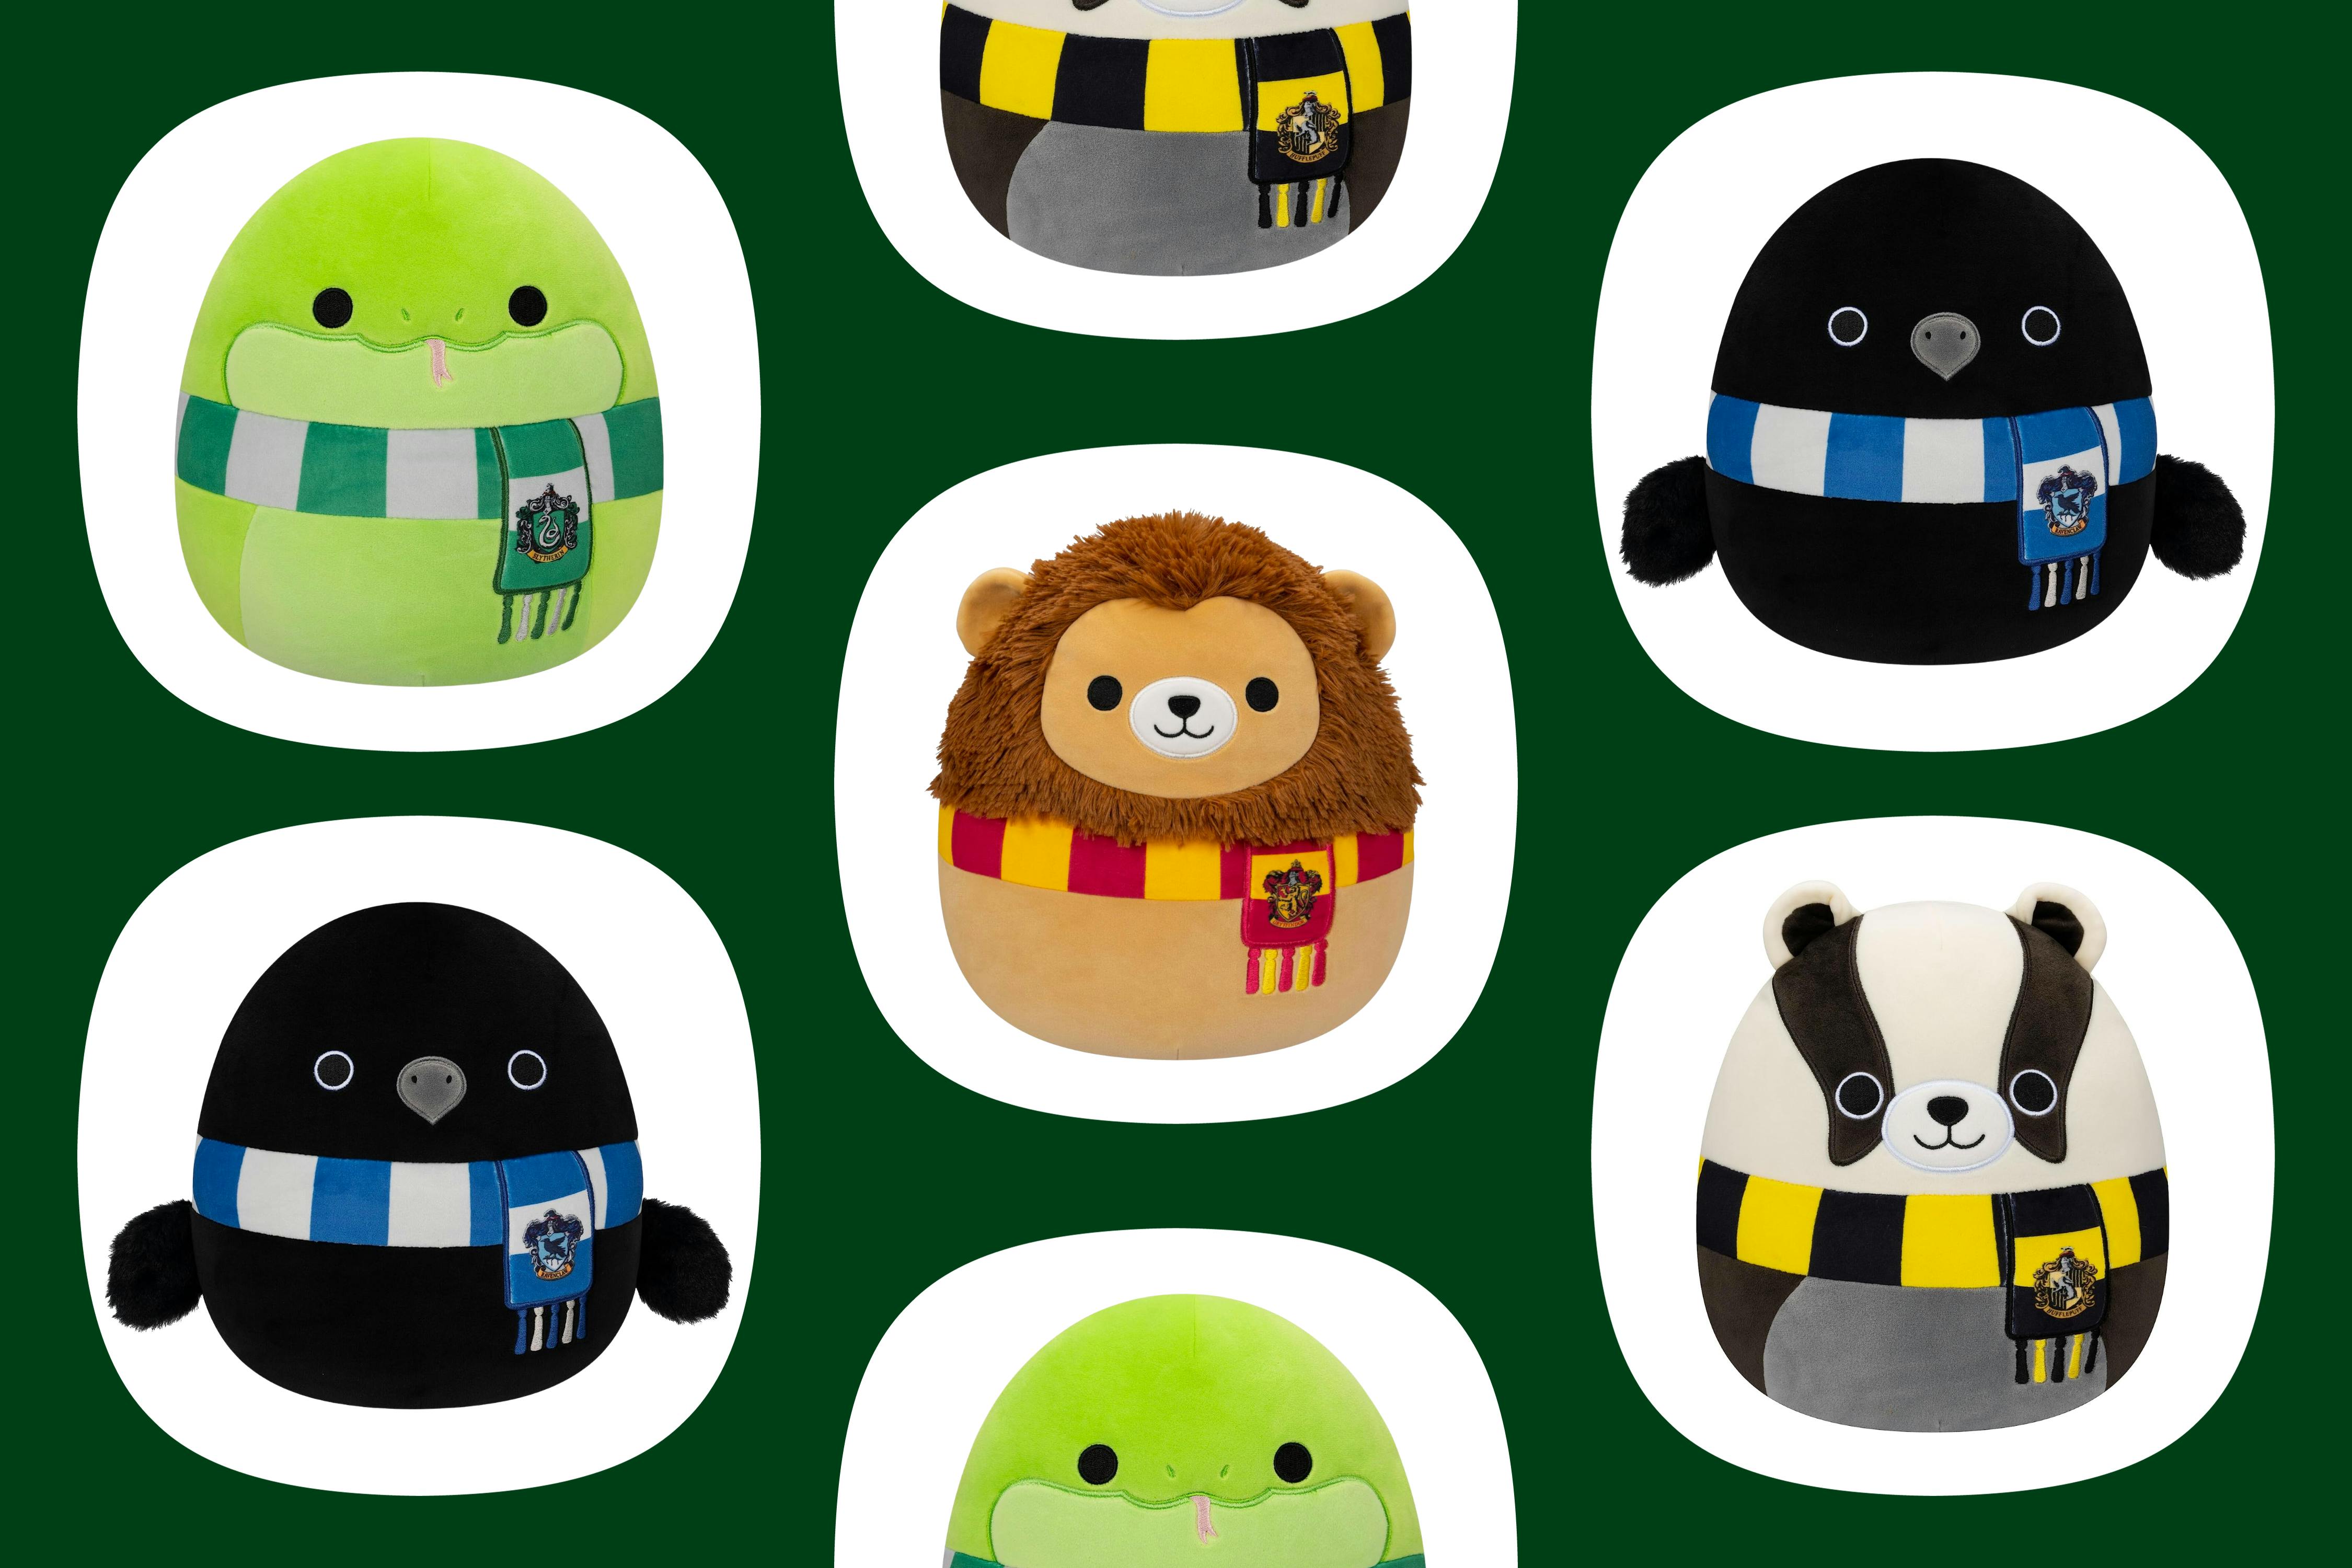 Squishmallows Harry Potter Gryffindor mascots animals of Ravenclaw,  Hufflepuff and Slytherin 